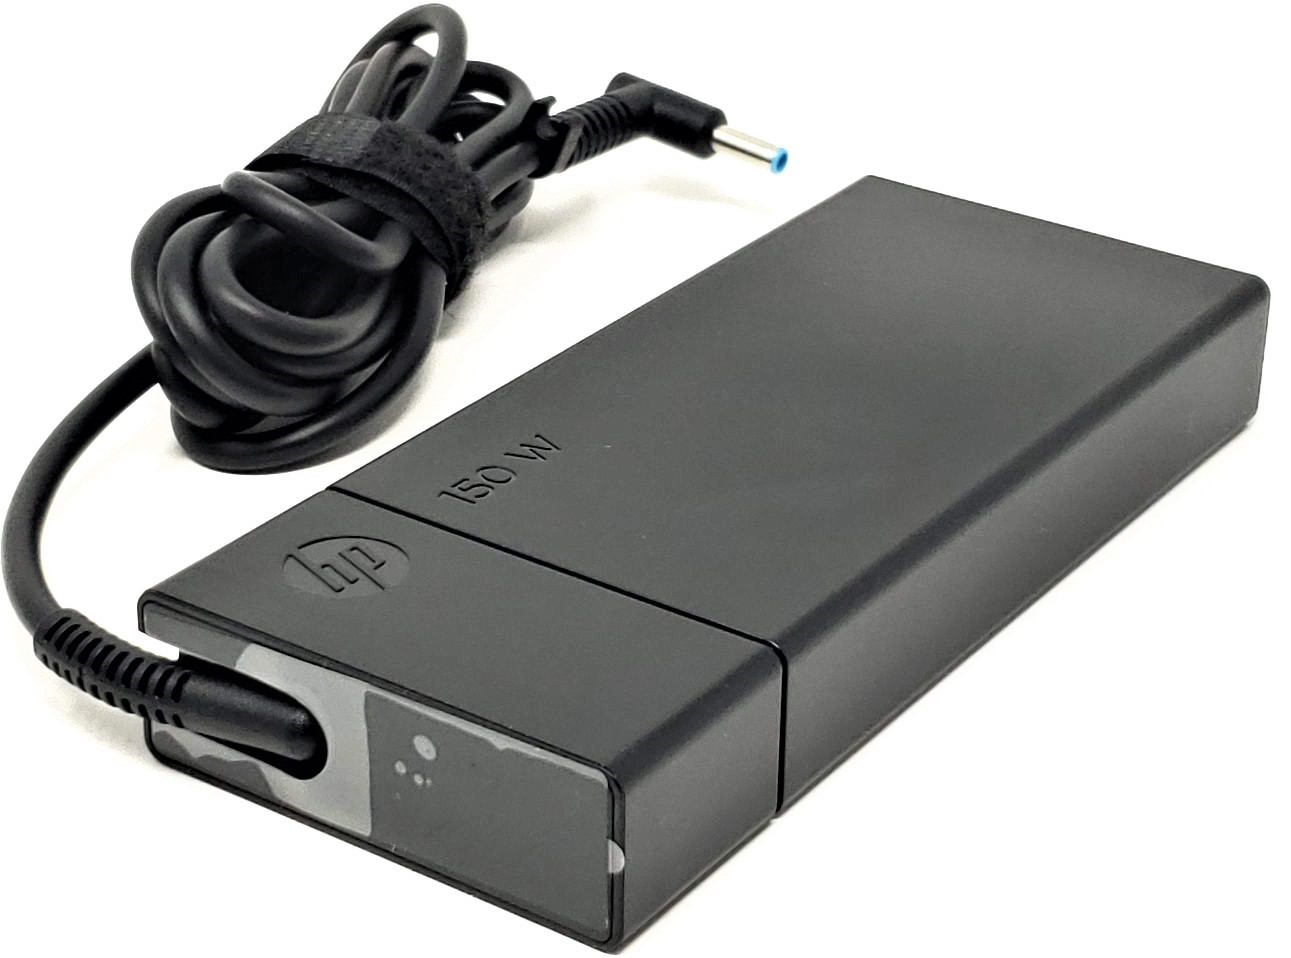 HP 776620-001 - Smart AC adapter (150W) - 4.5mm barrel connector, with power factor correction (FPC) Requires separate 3-wire AC power cord with